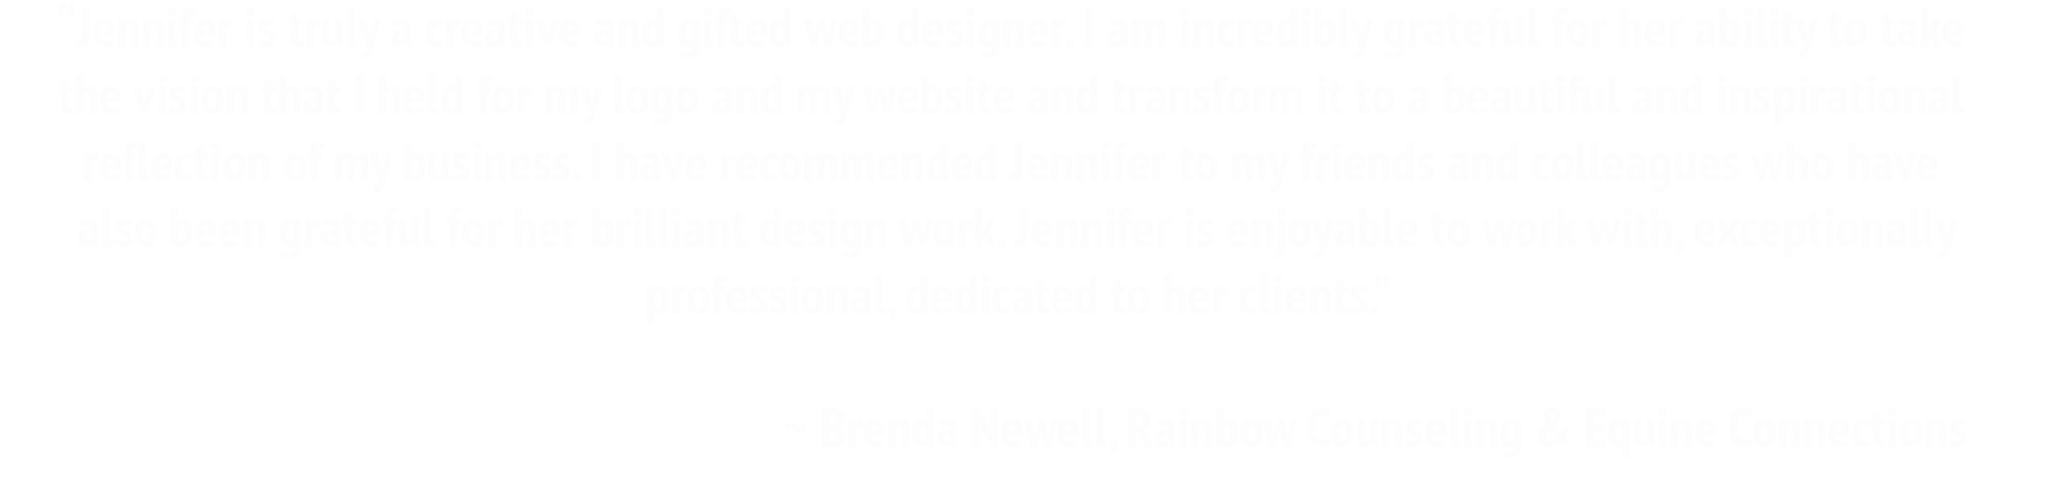 Jennifer is truly a creative and gifted web designer. I am incredibly grateful for her ability to take the vision that I held for my logo and my website and transform it to a beautiful and inspirational reflection of my business. I have recommended Jennifer to my friends and colleagues who have also been grateful for her brilliant design work. Jennifer is enjoyable to work with, exceptionally professional, dedicated to her clients. ~ Brenda Newell, Rainbow Counseling and Equine Connections